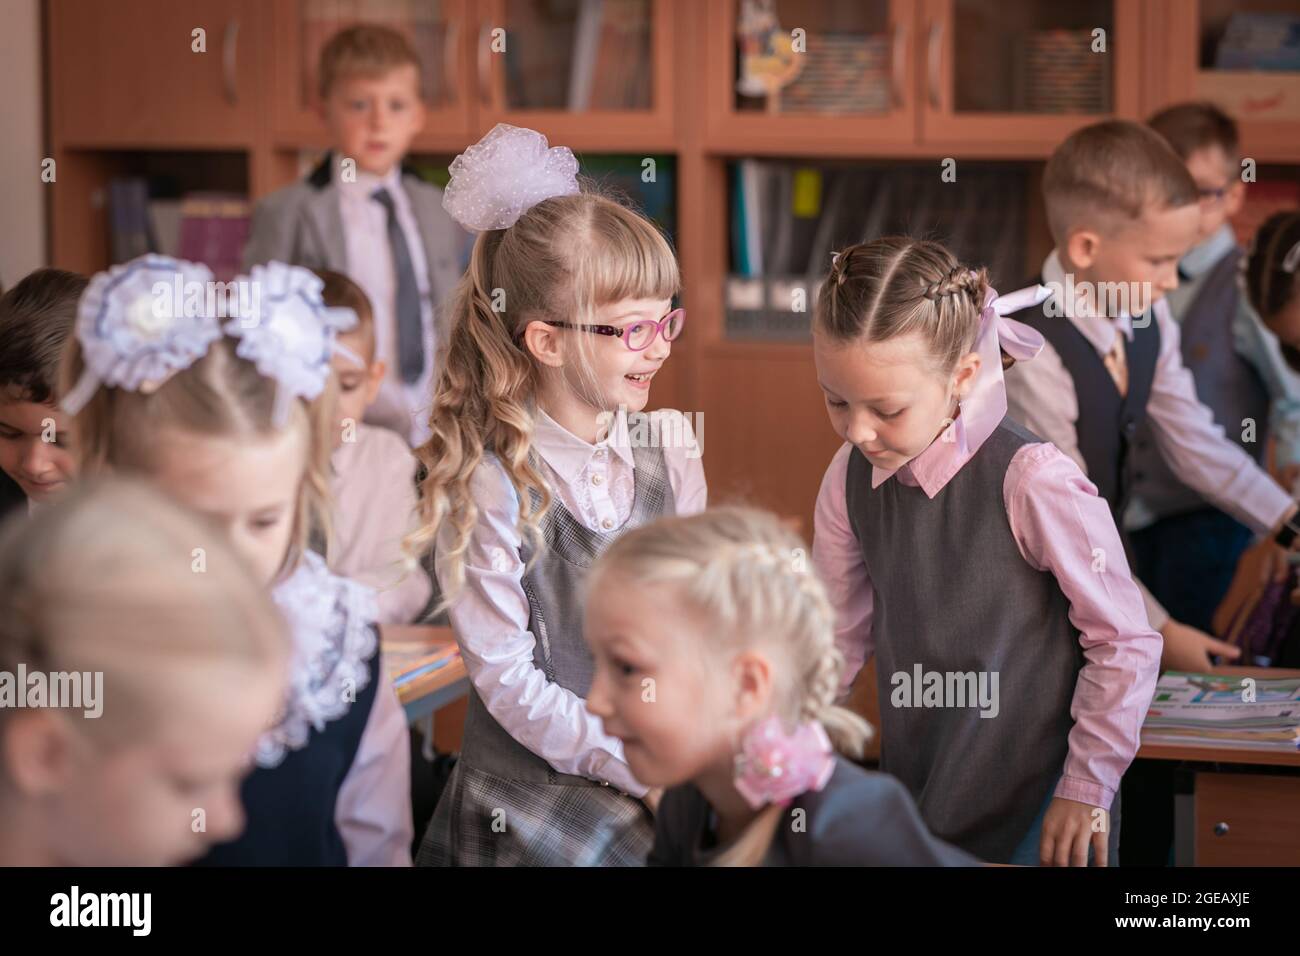 The first grader stands at the desk and answers the teacher's question. Moscow, Russia, September 2, 2019 Stock Photo